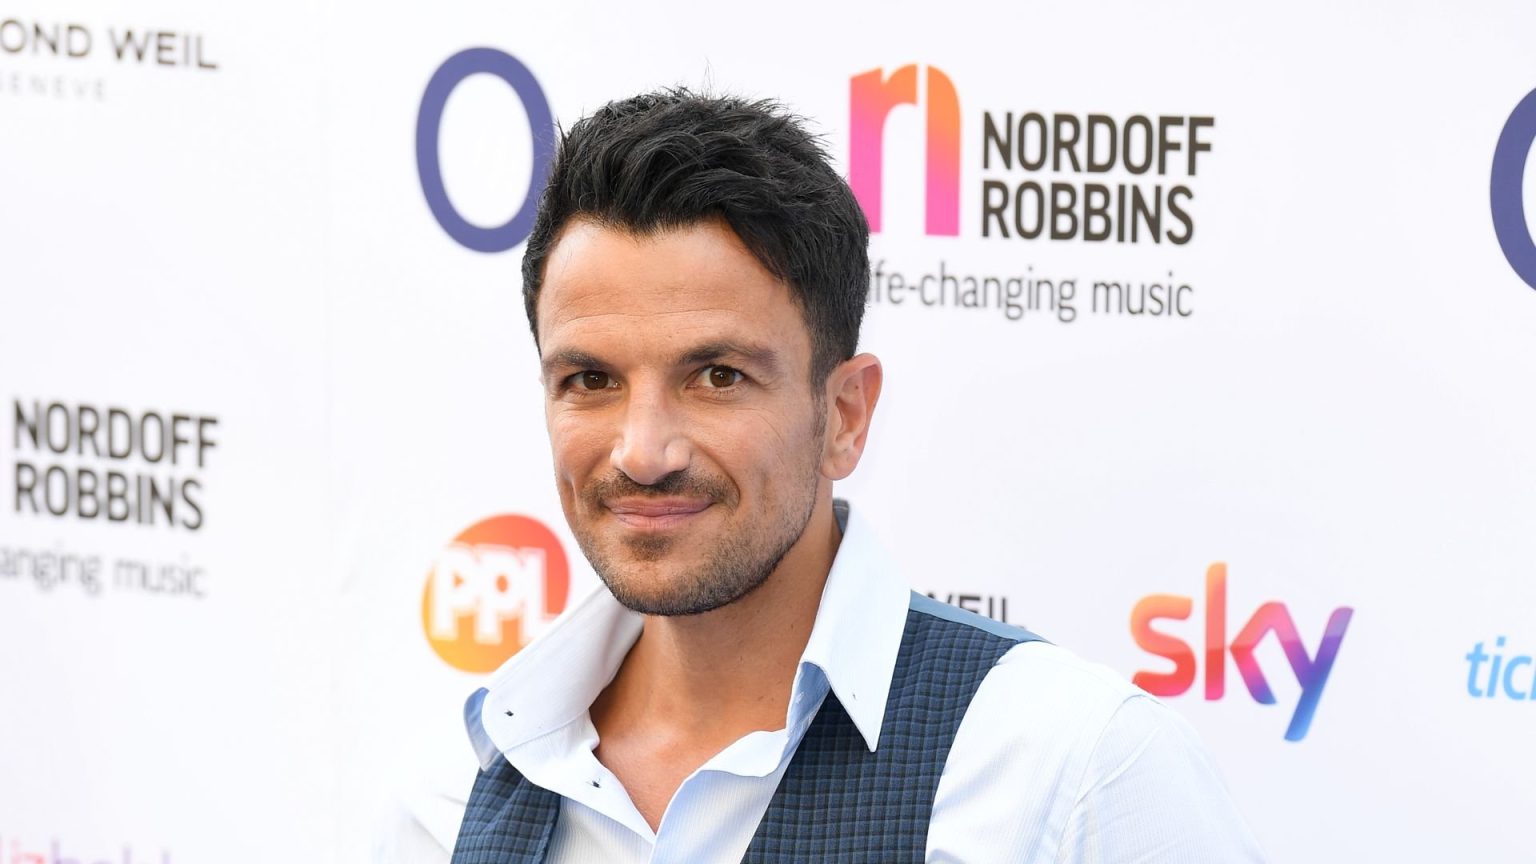 Peter Andre Net Worth 2023: Singing Career Income Age Wife